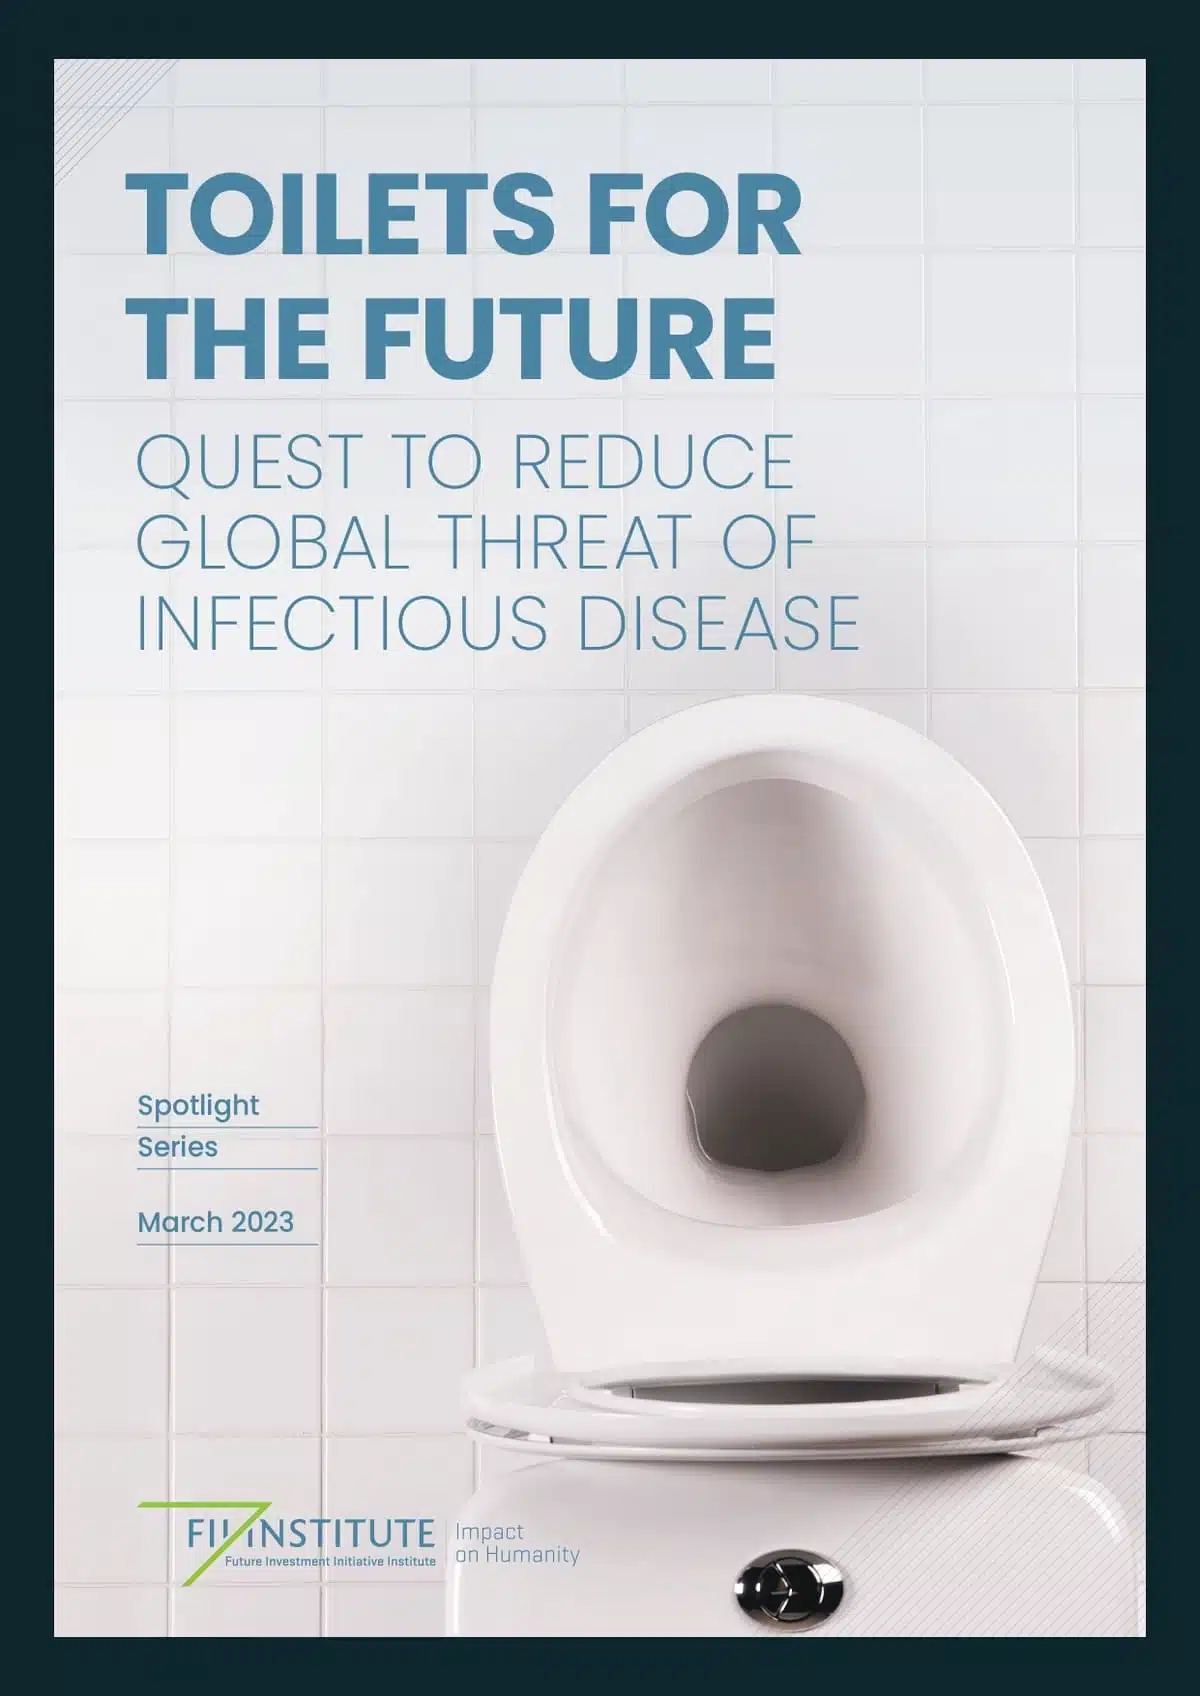 https://fii-institute.org/wp-content/uploads/2023/05/Toilets-for-the-Future_220117_page-0001.jpg.webp